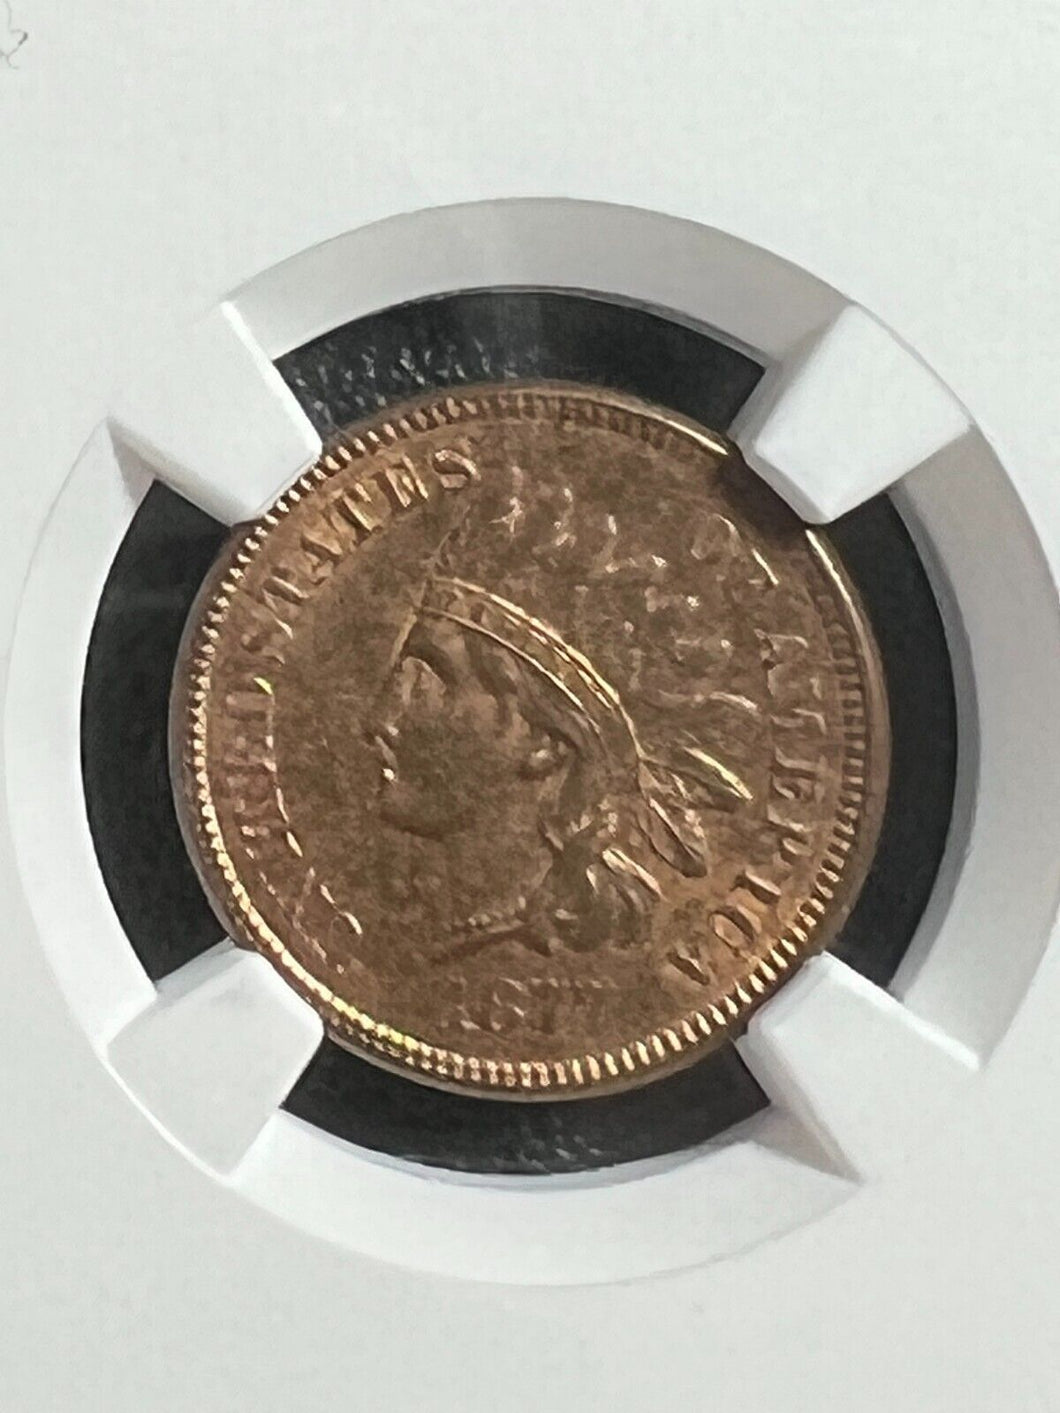 1877 1¢ Indian Head Cent NGC MS63 RB & CAC - Key to the Series! SUPER COIN!